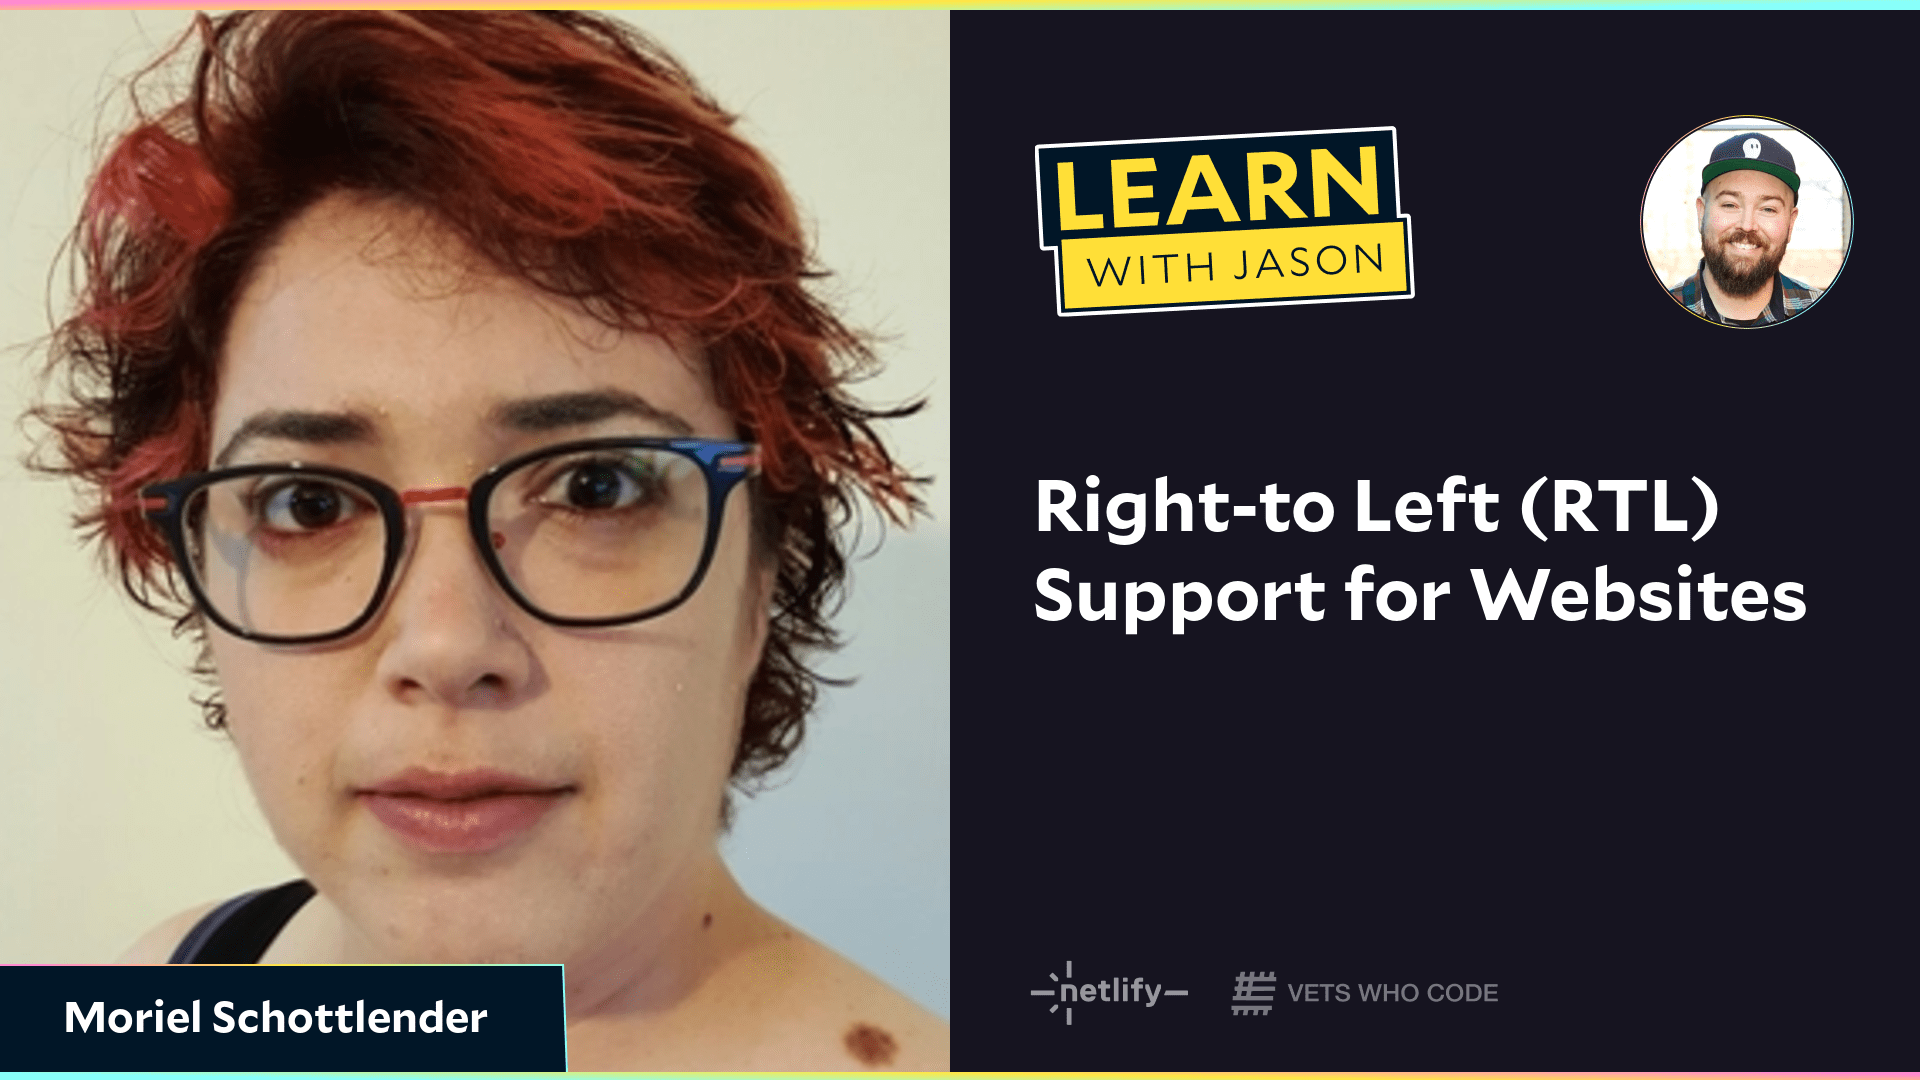 Right-to Left (RTL) Support for Websites (with Moriel Schottlender)